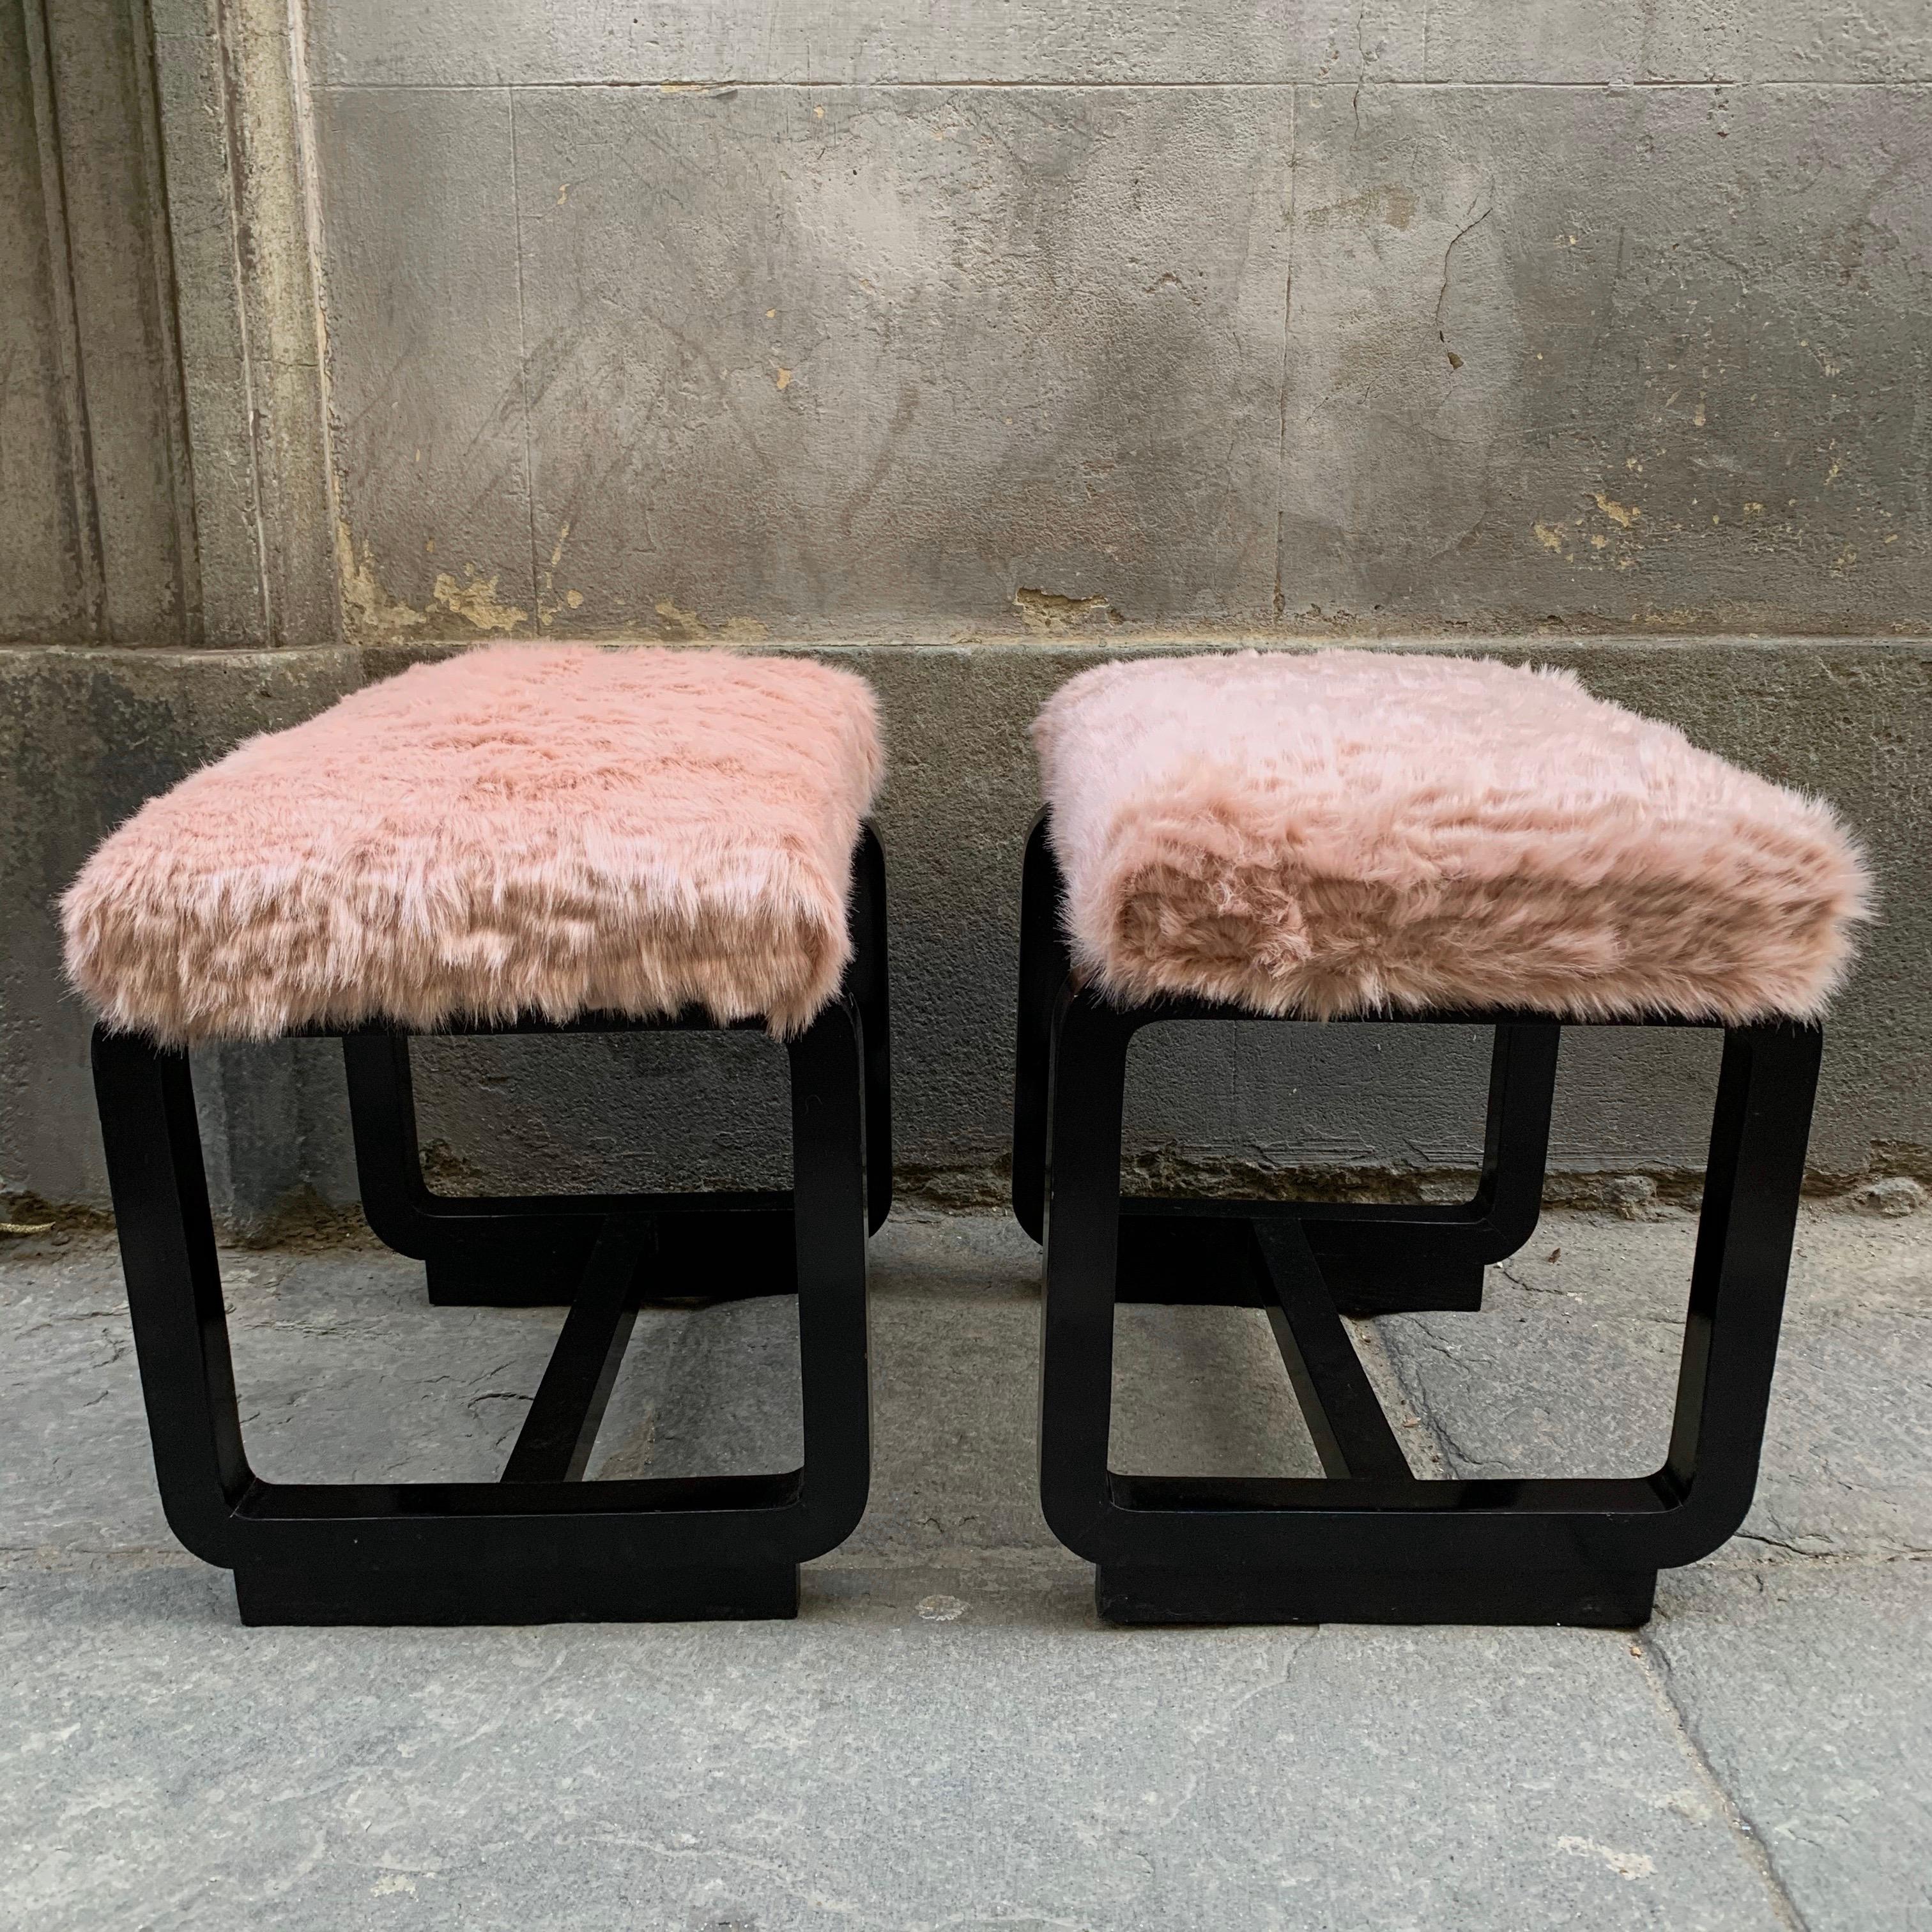 Mid-20th Century Pair of Deco Benches in Black Lacquered Wood and Pale Pink Eco Fur Seats, 1930